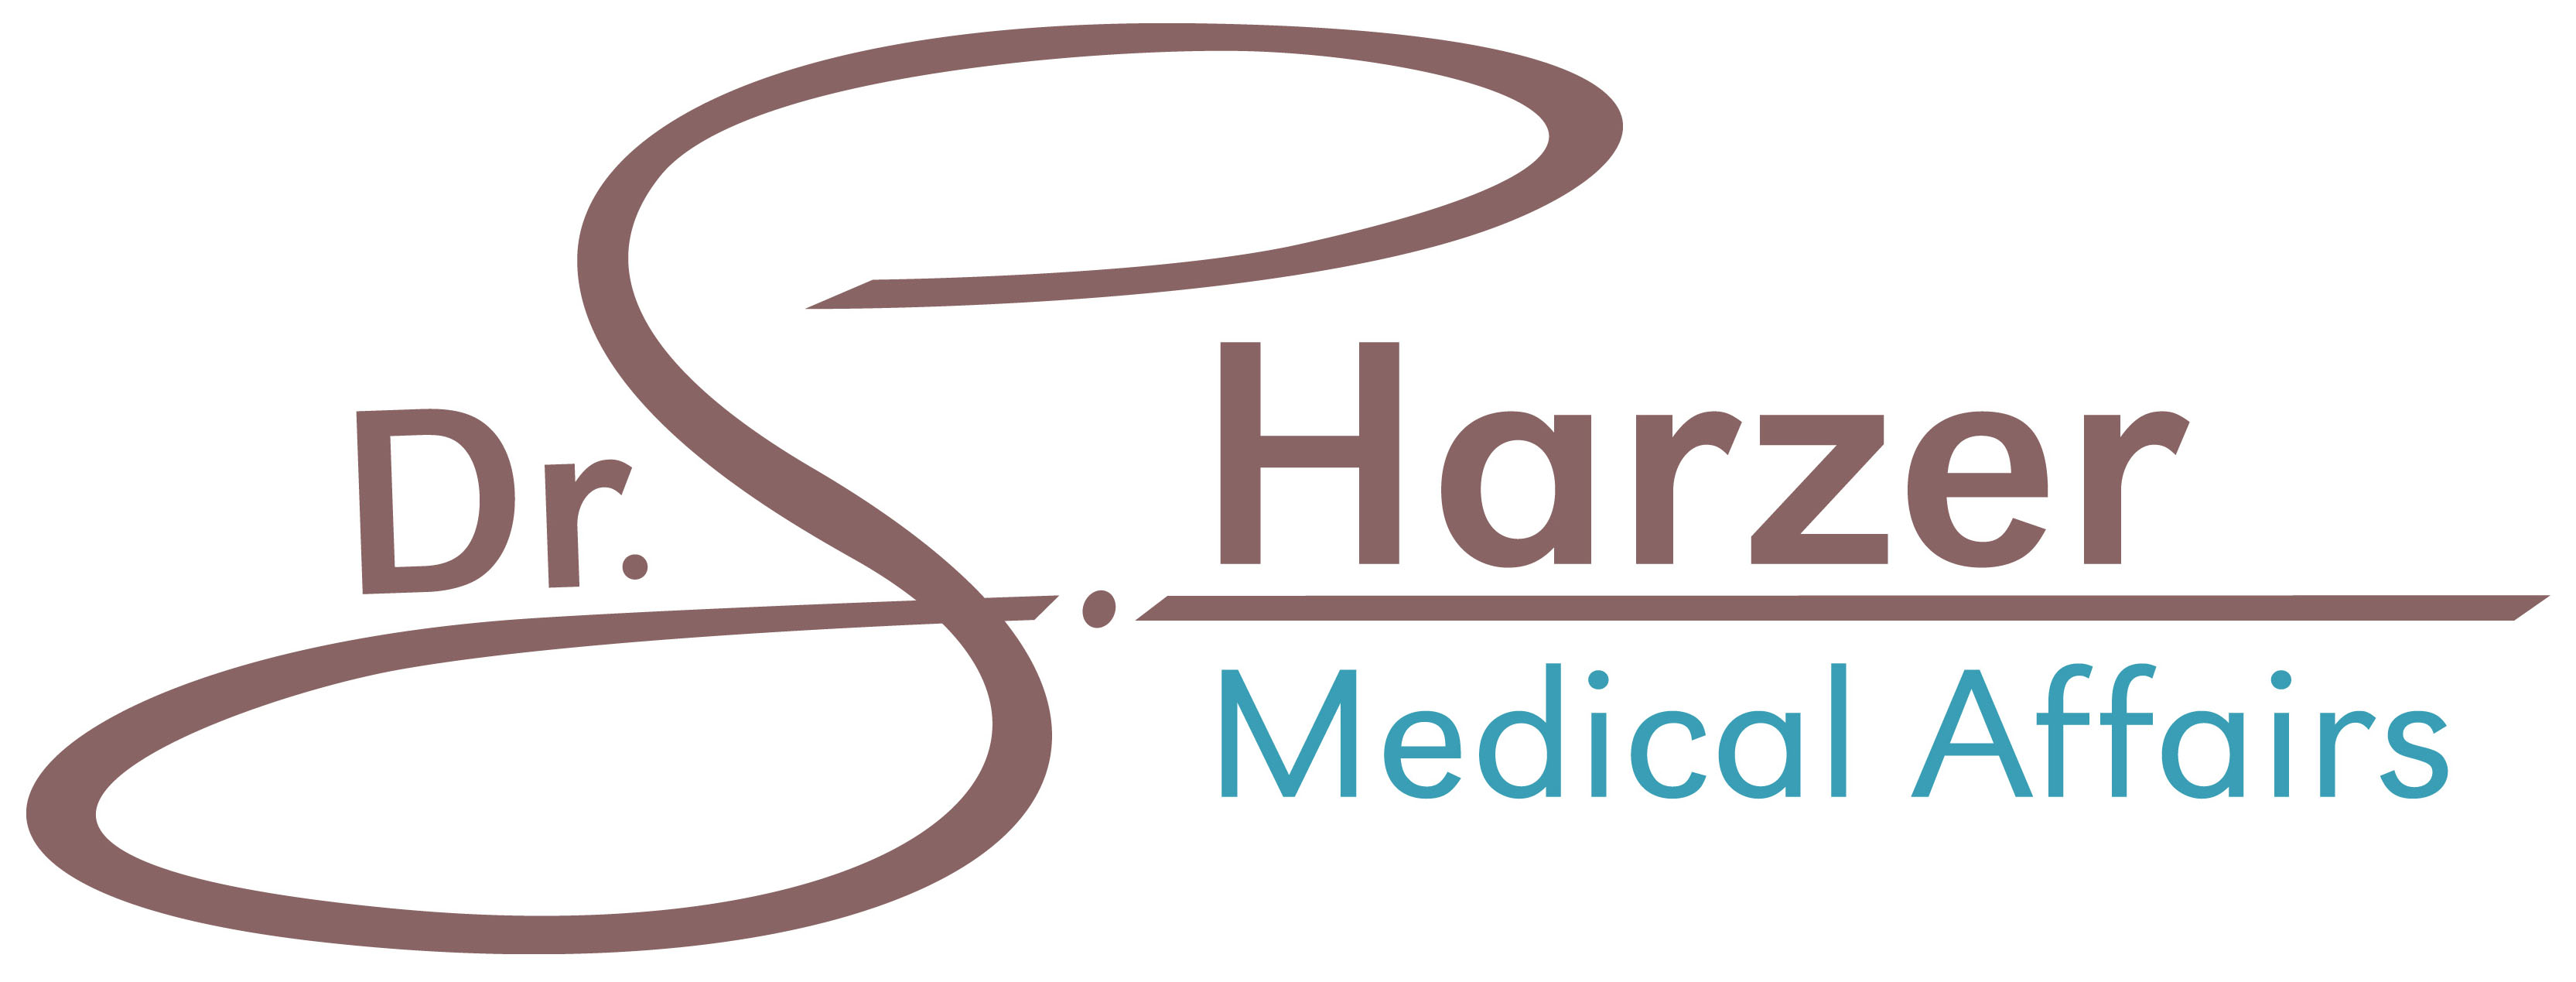 Dr. S. Harzer Medical Affairs